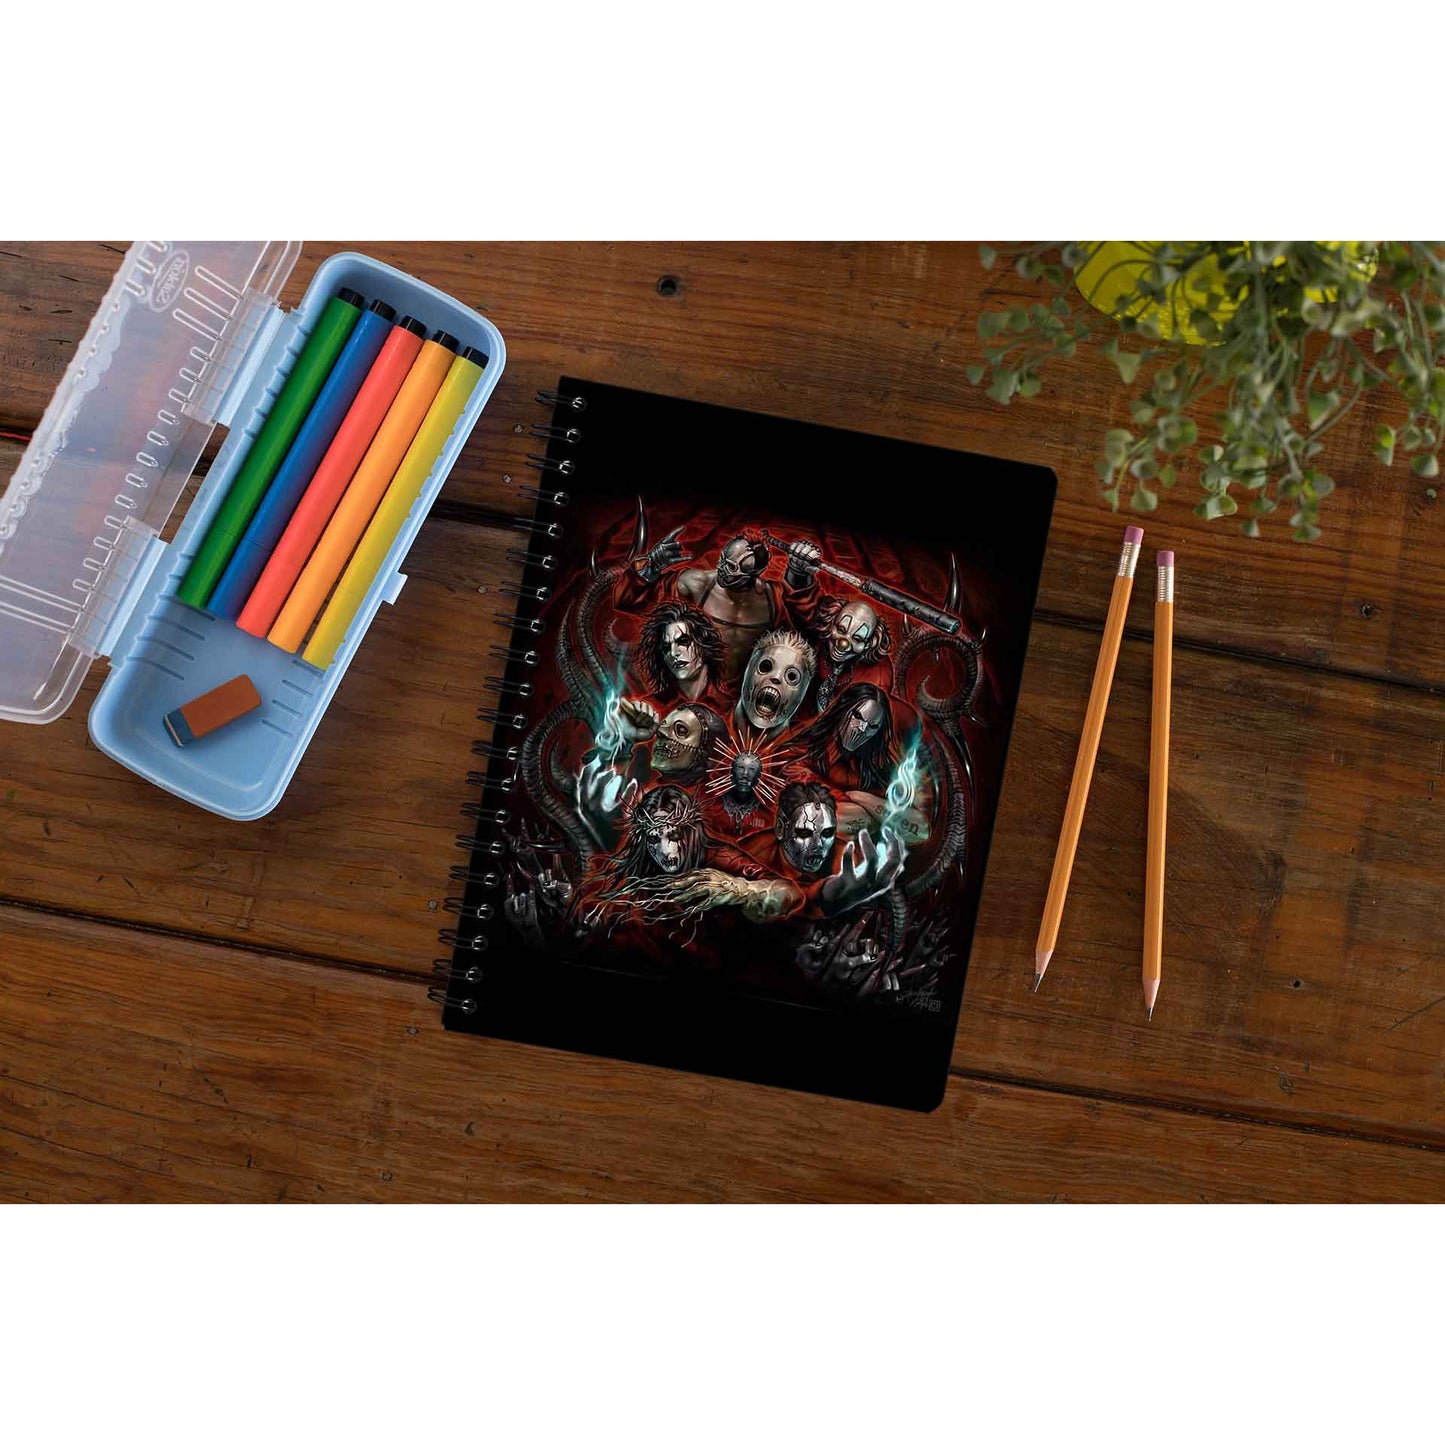 slipknot fan art notebook notepad diary buy online united states of america usa the banyan tee tbt unruled